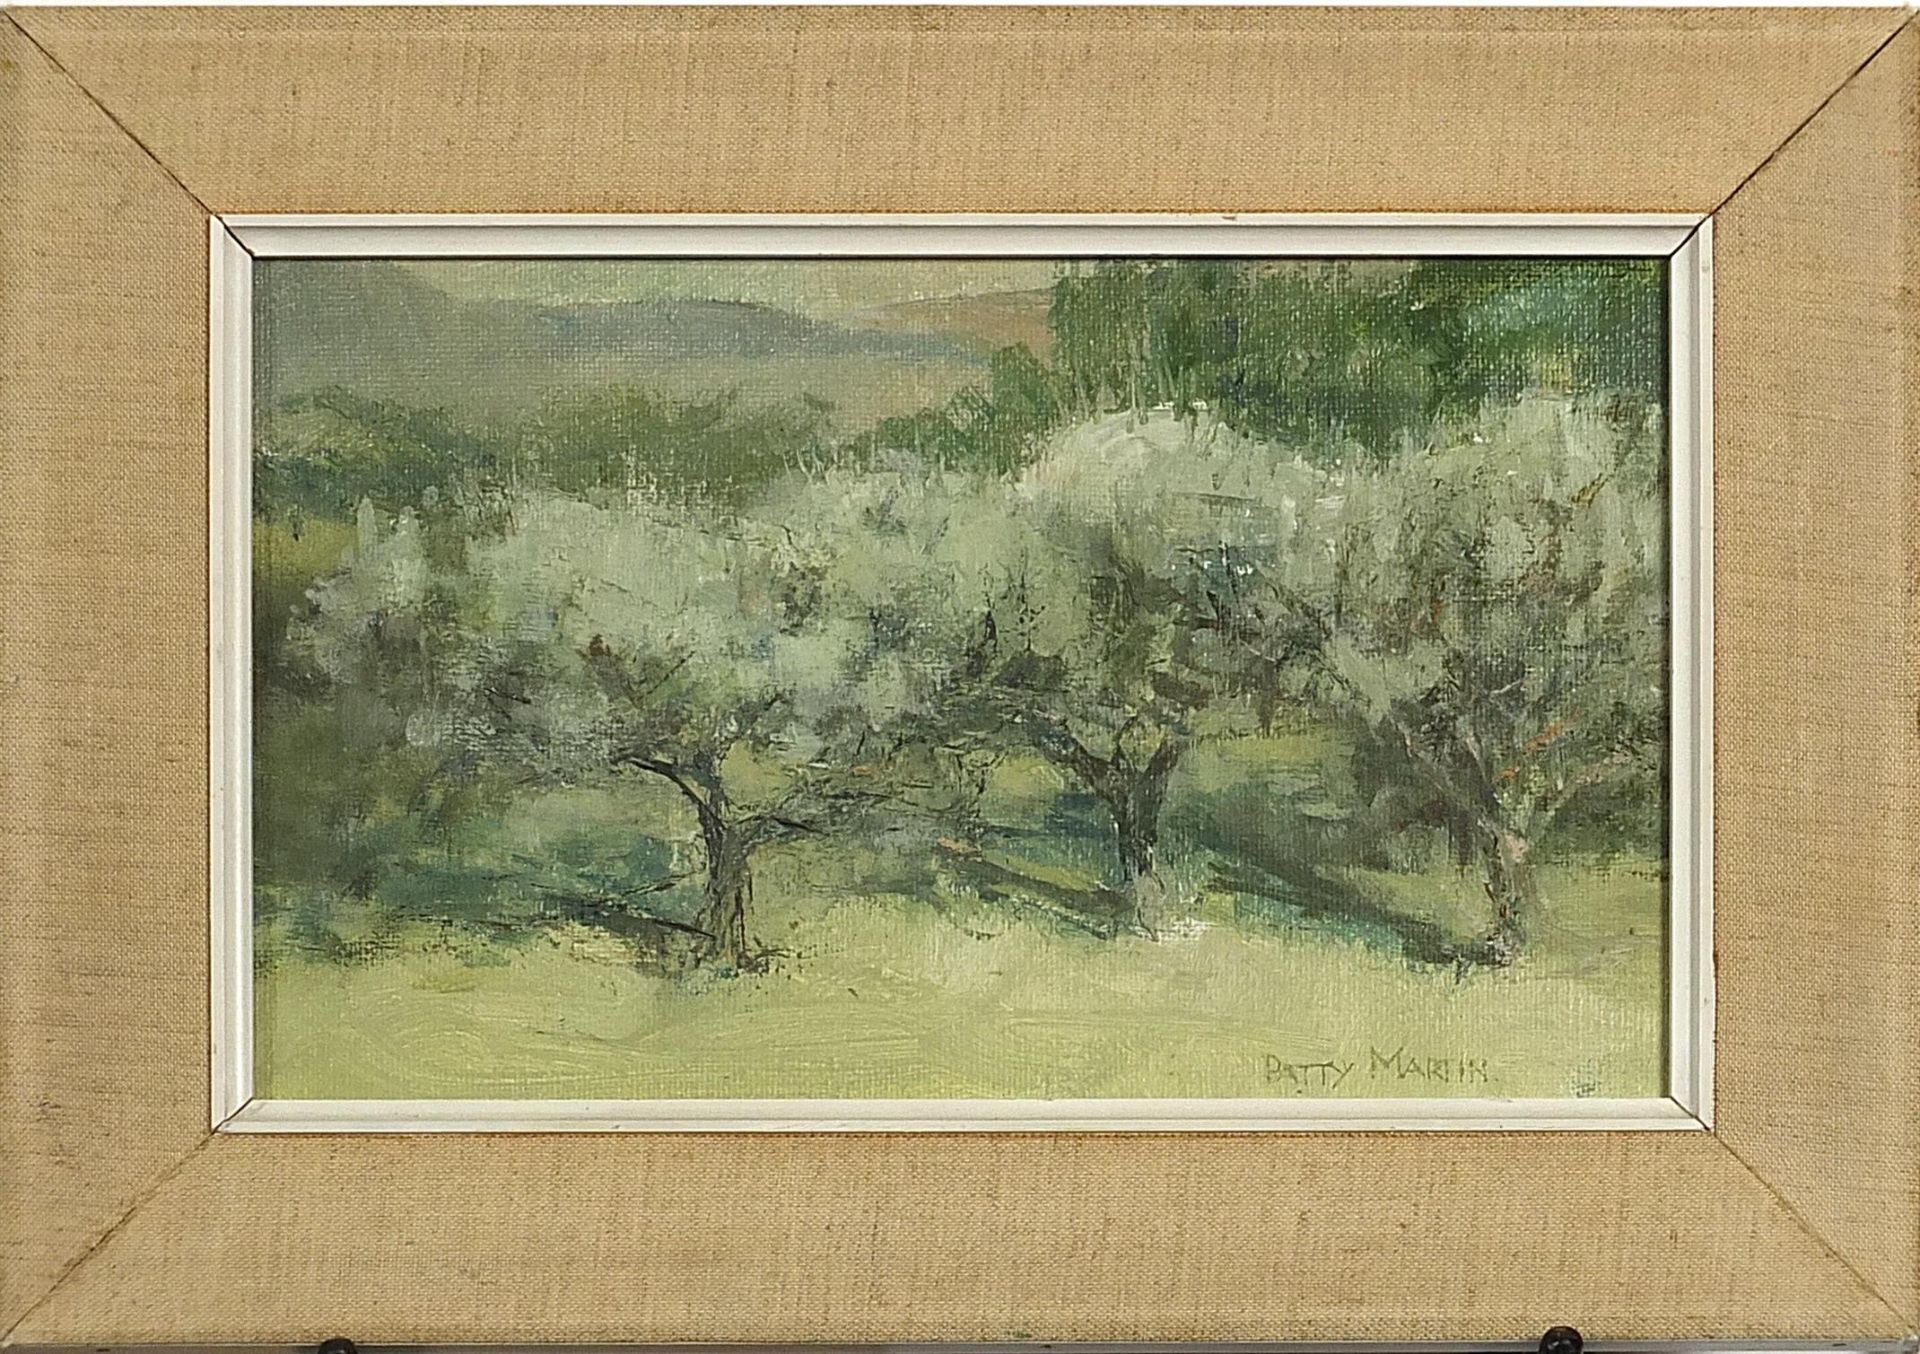 Patty Martin - Apple trees, oil on canvas board, details verso, mounted and framed, 28cm x 17cm - Image 2 of 4